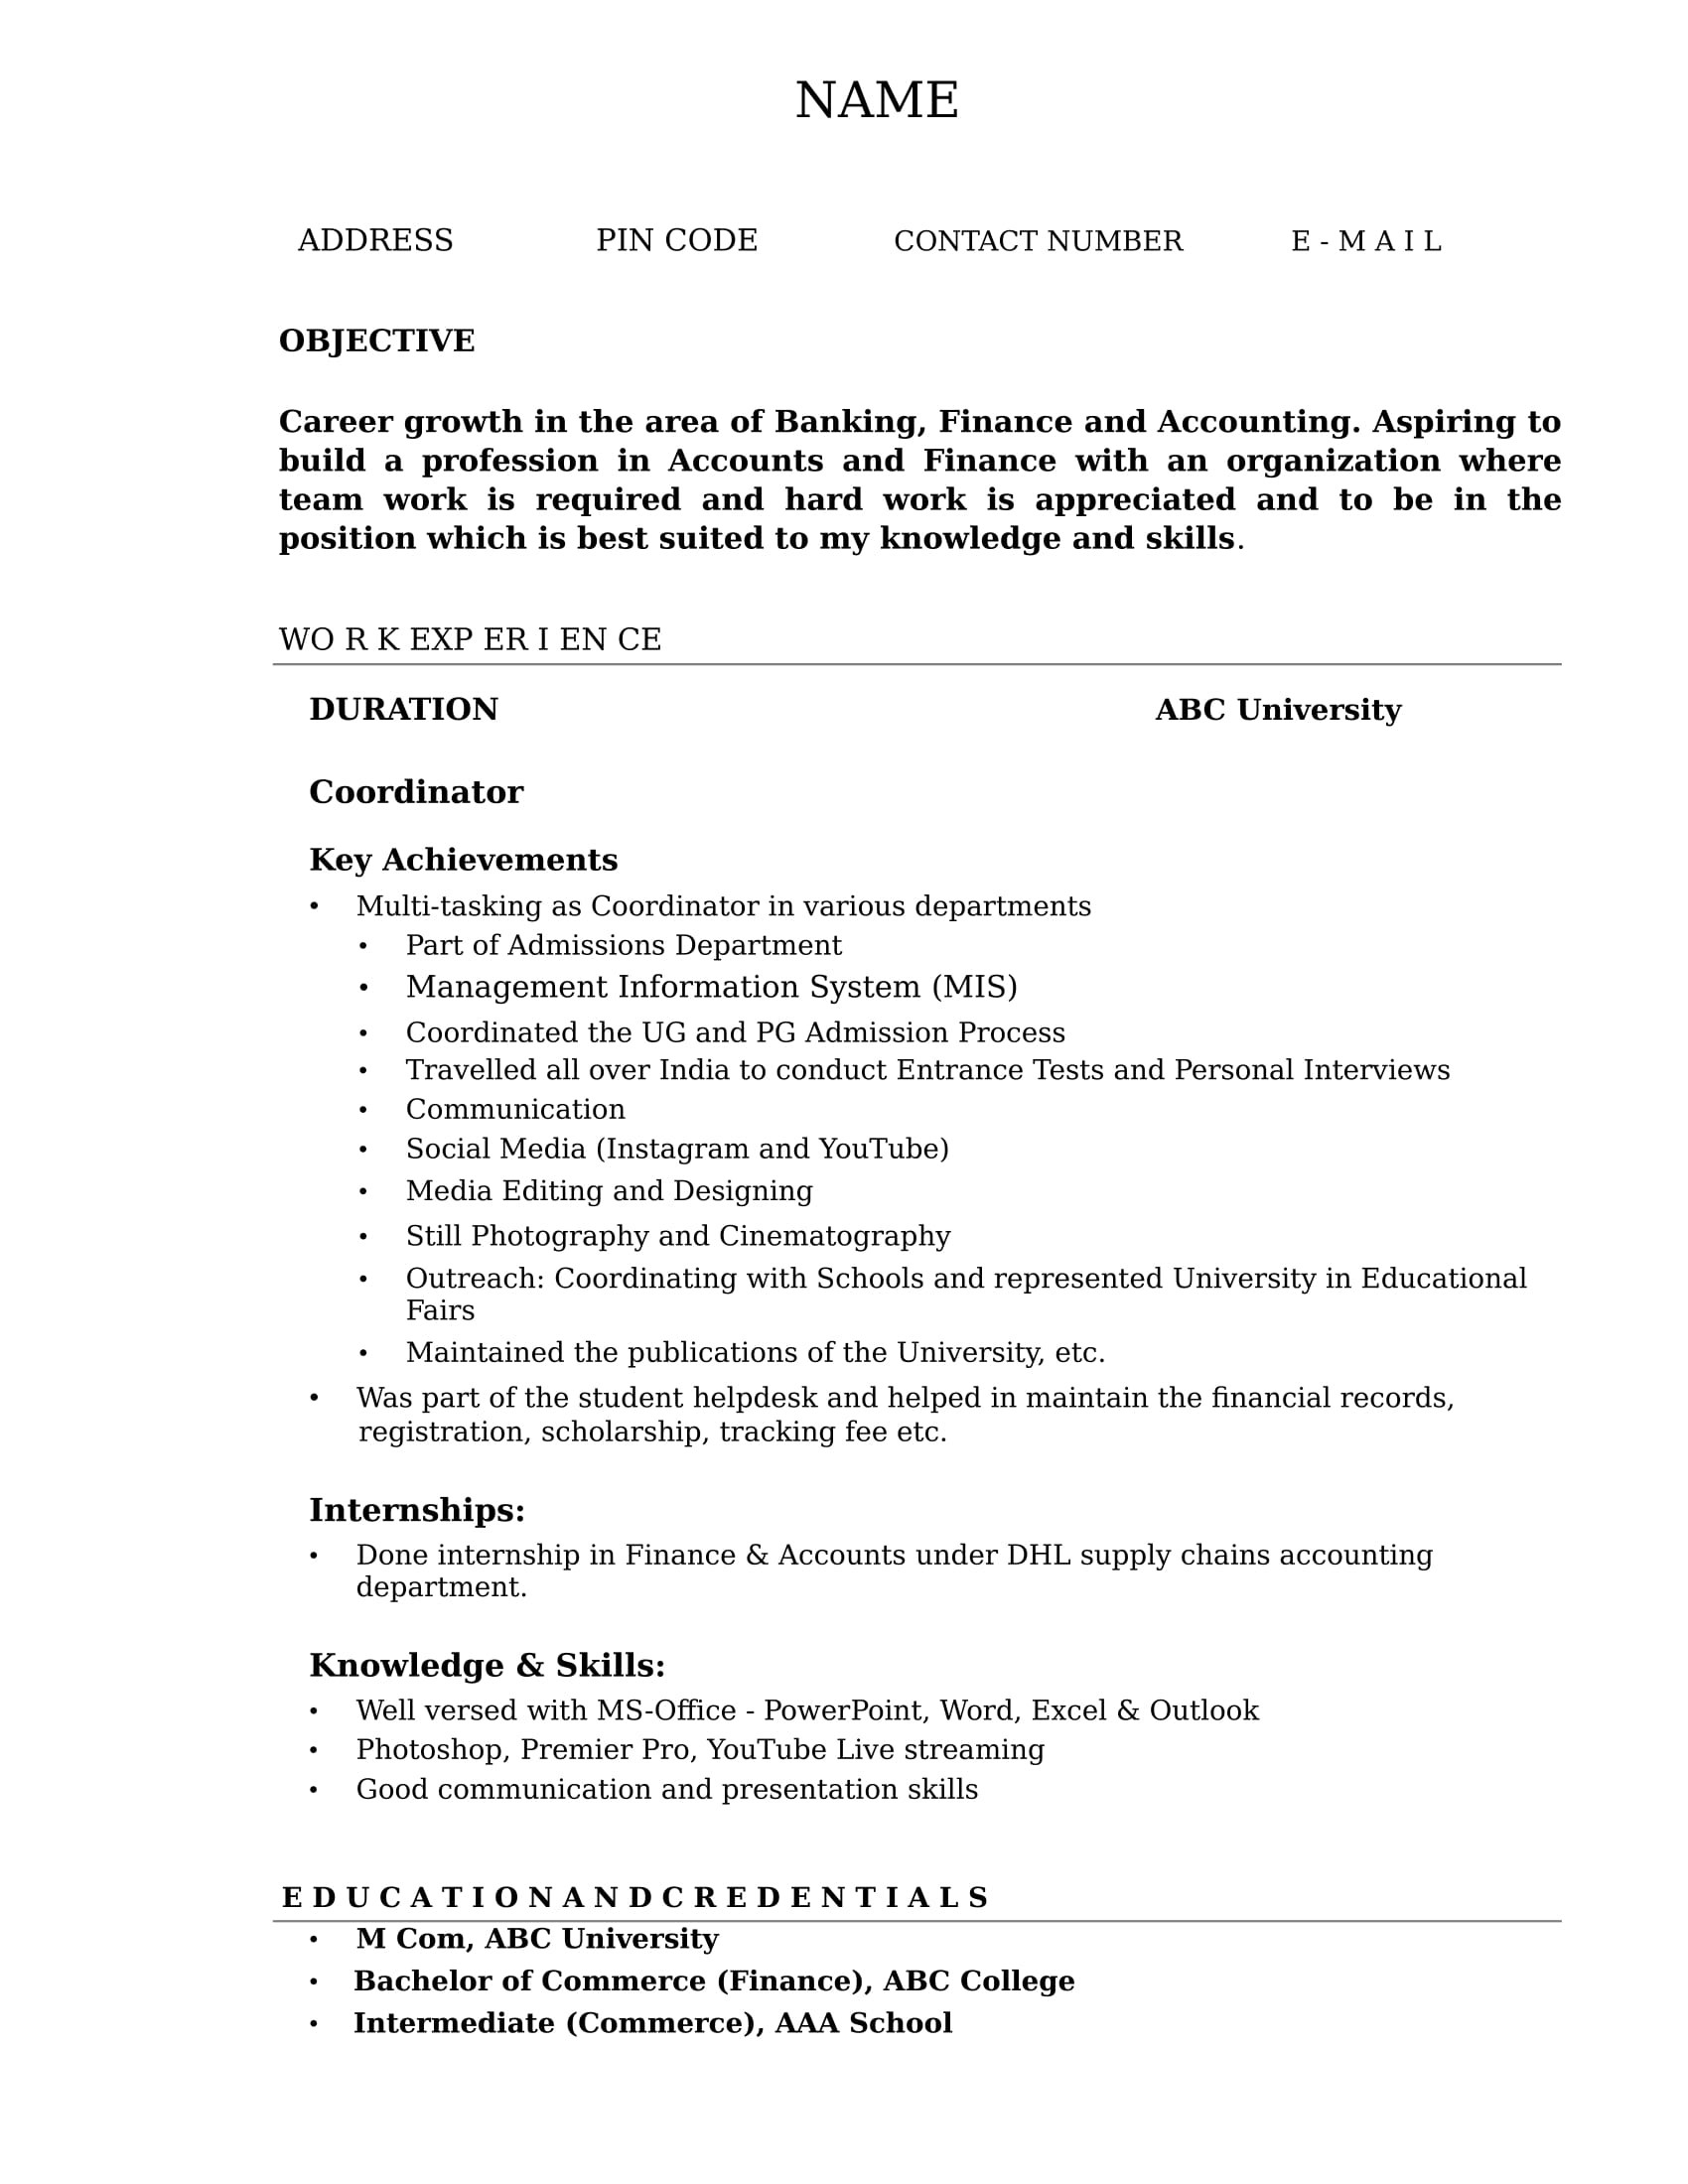 Sample Resume for Finance and Accounting Freshers Resume Templates for Accounting & Finance Freshers